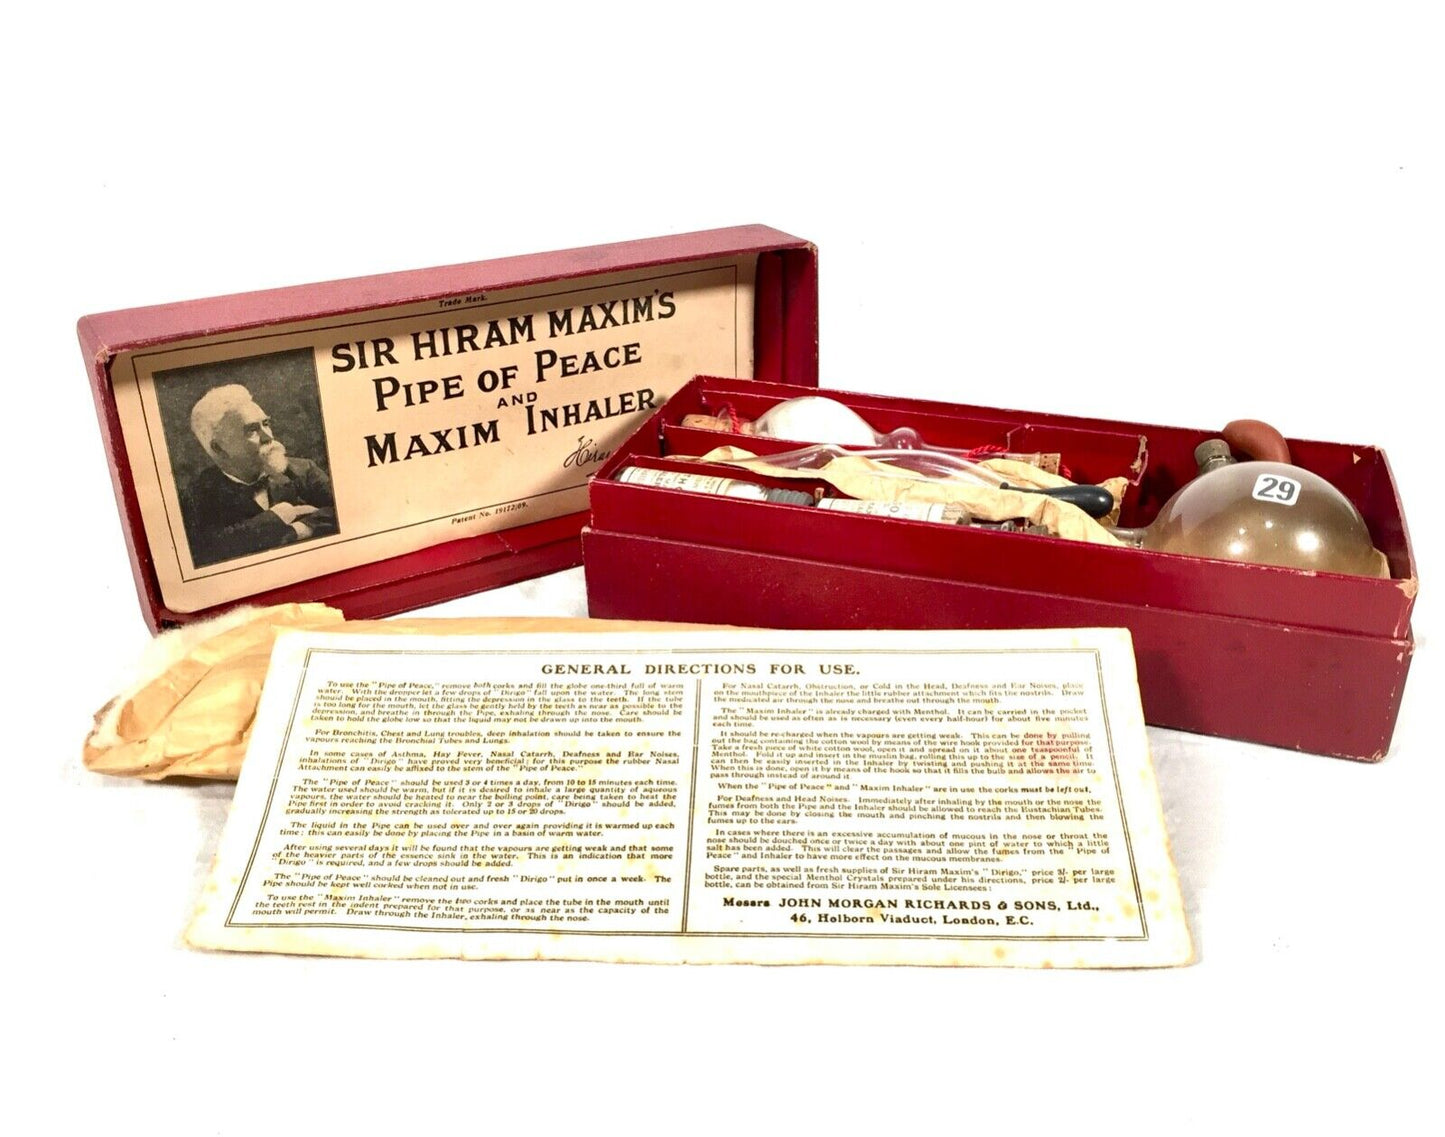 Antique Apothecary Interest Sir Hiram Maxim's Pipe of Peace c1910 / Complete Box